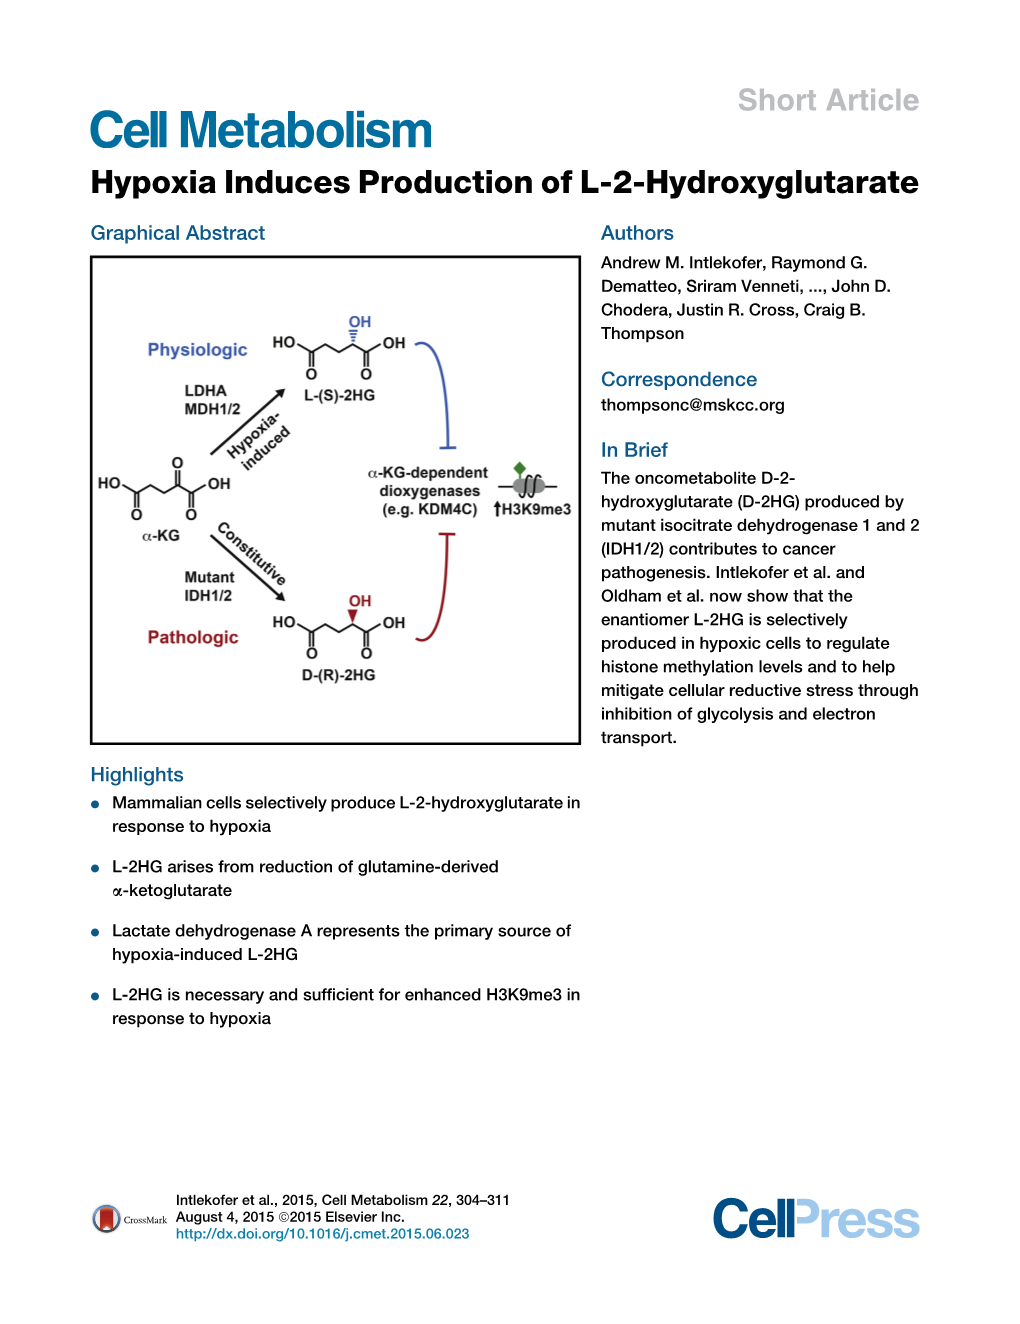 Hypoxia Induces Production of L-2-Hydroxyglutarate